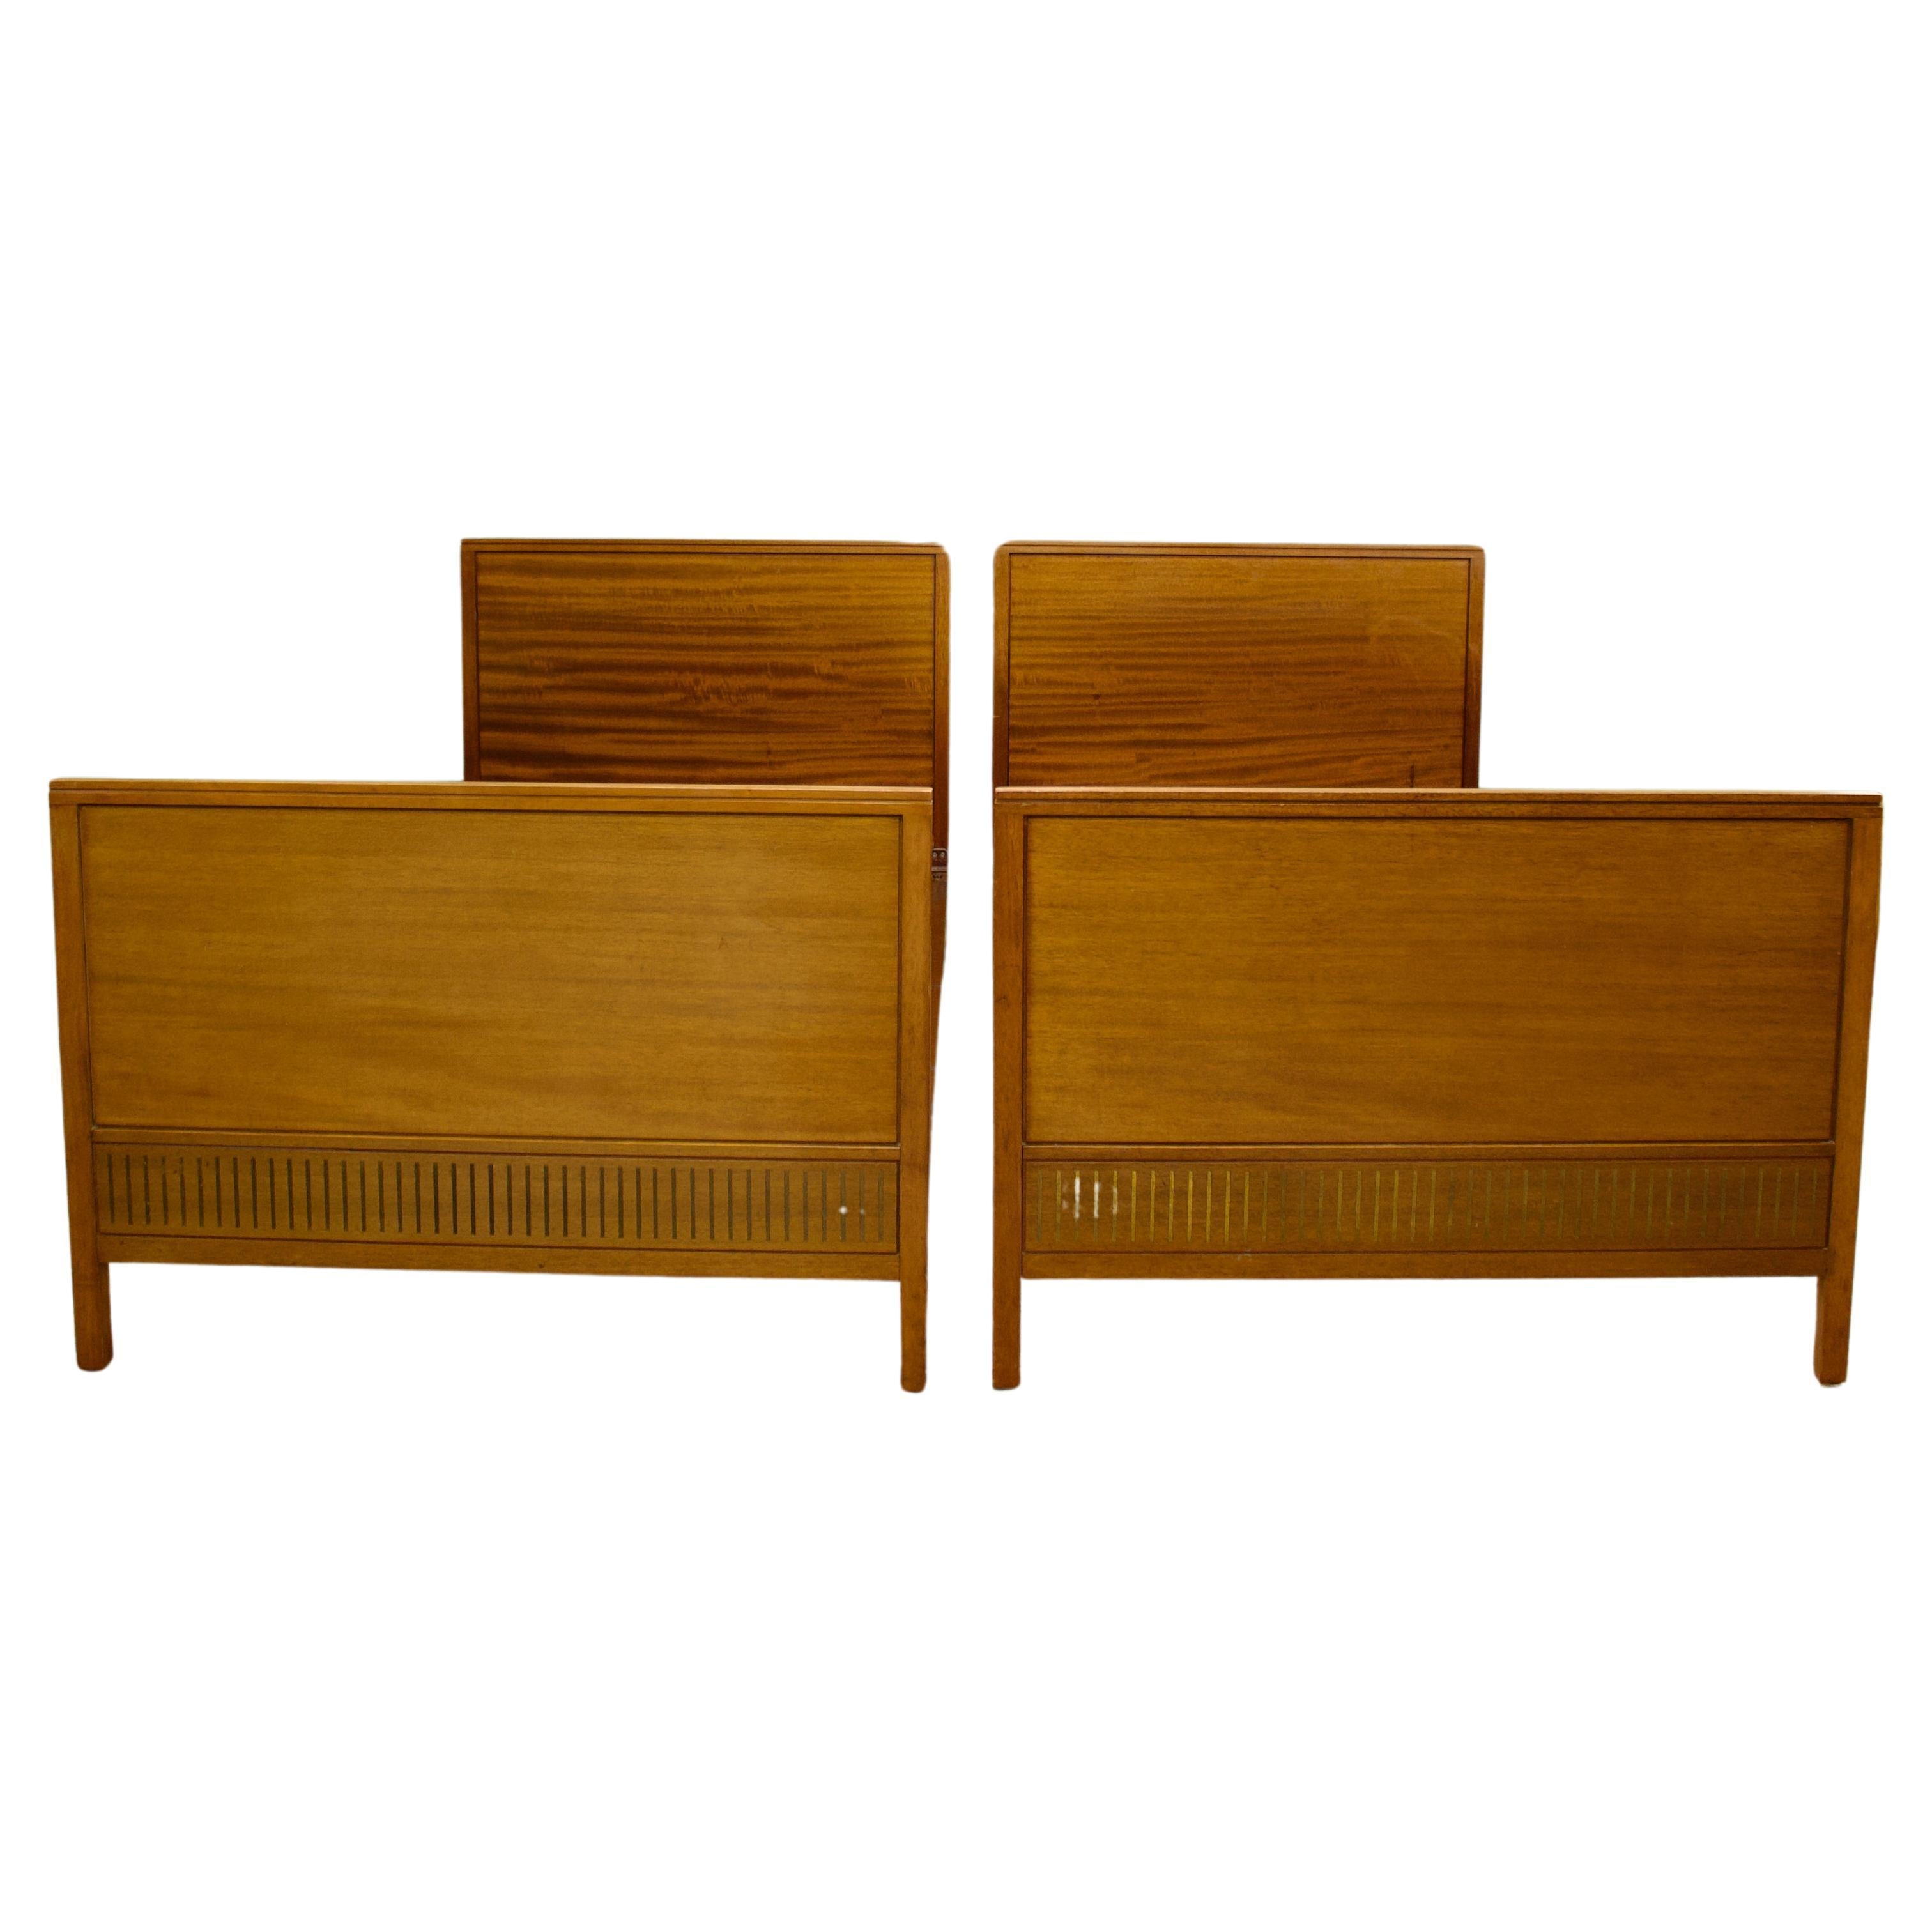 Vintage Mid Century Pair Single Beds by Loughborough for Heals, 1950s For Sale